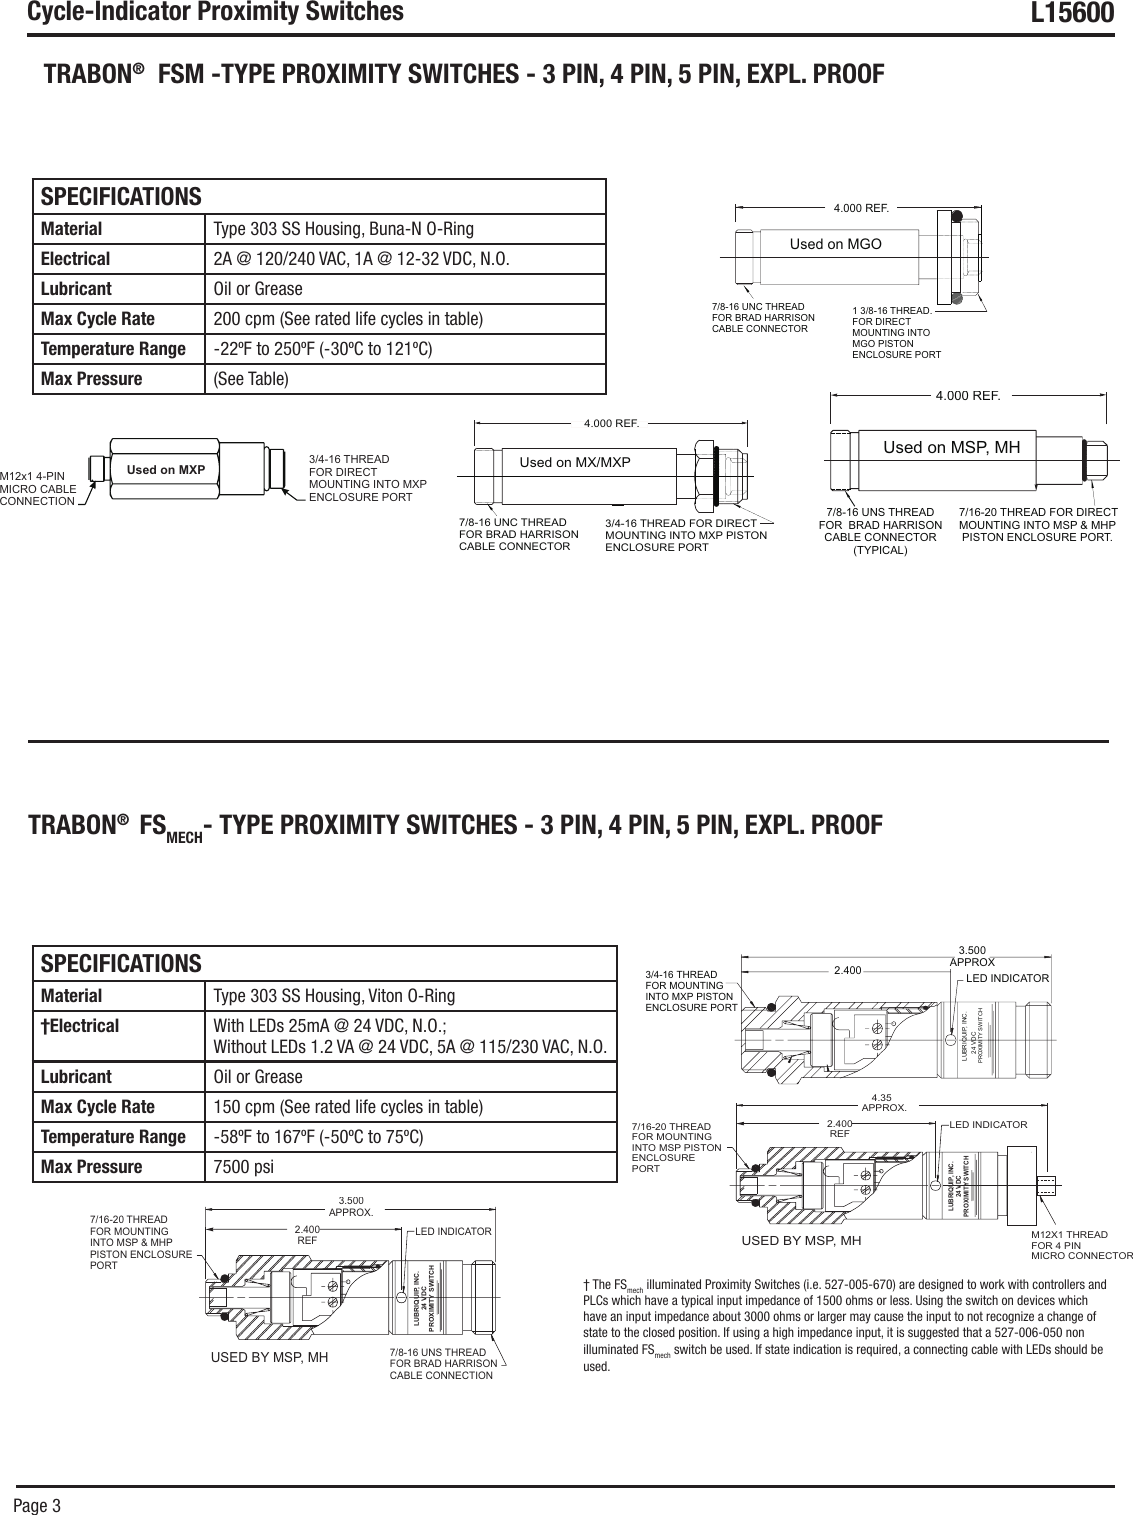 Page 3 of 4 - Graco Graco-Cycle-Indicator-Proximity-Switches-Users-Manual-  Graco-cycle-indicator-proximity-switches-users-manual